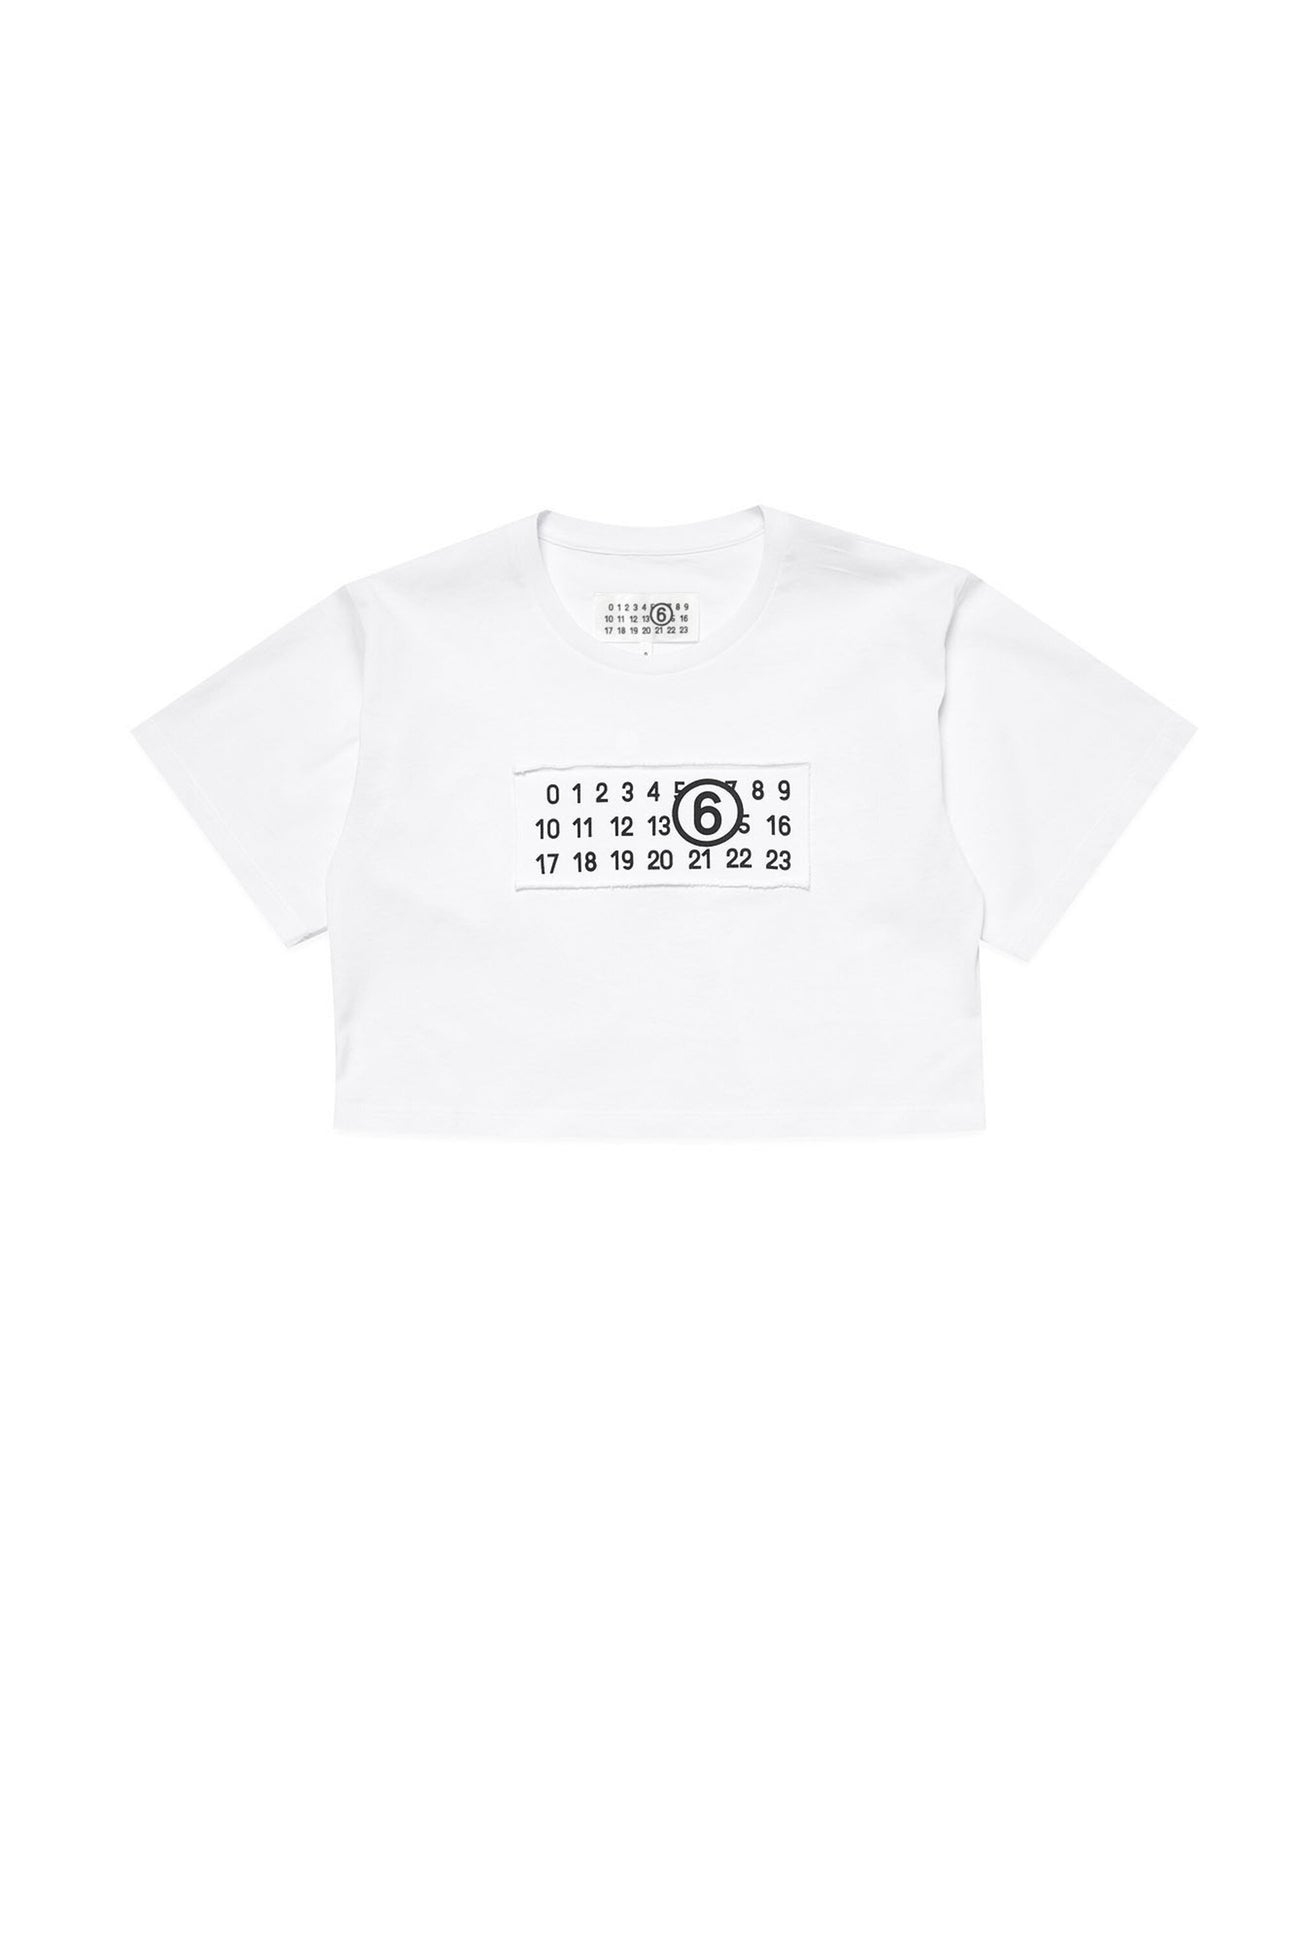 Cropped T-shirt branded with numeric logo 